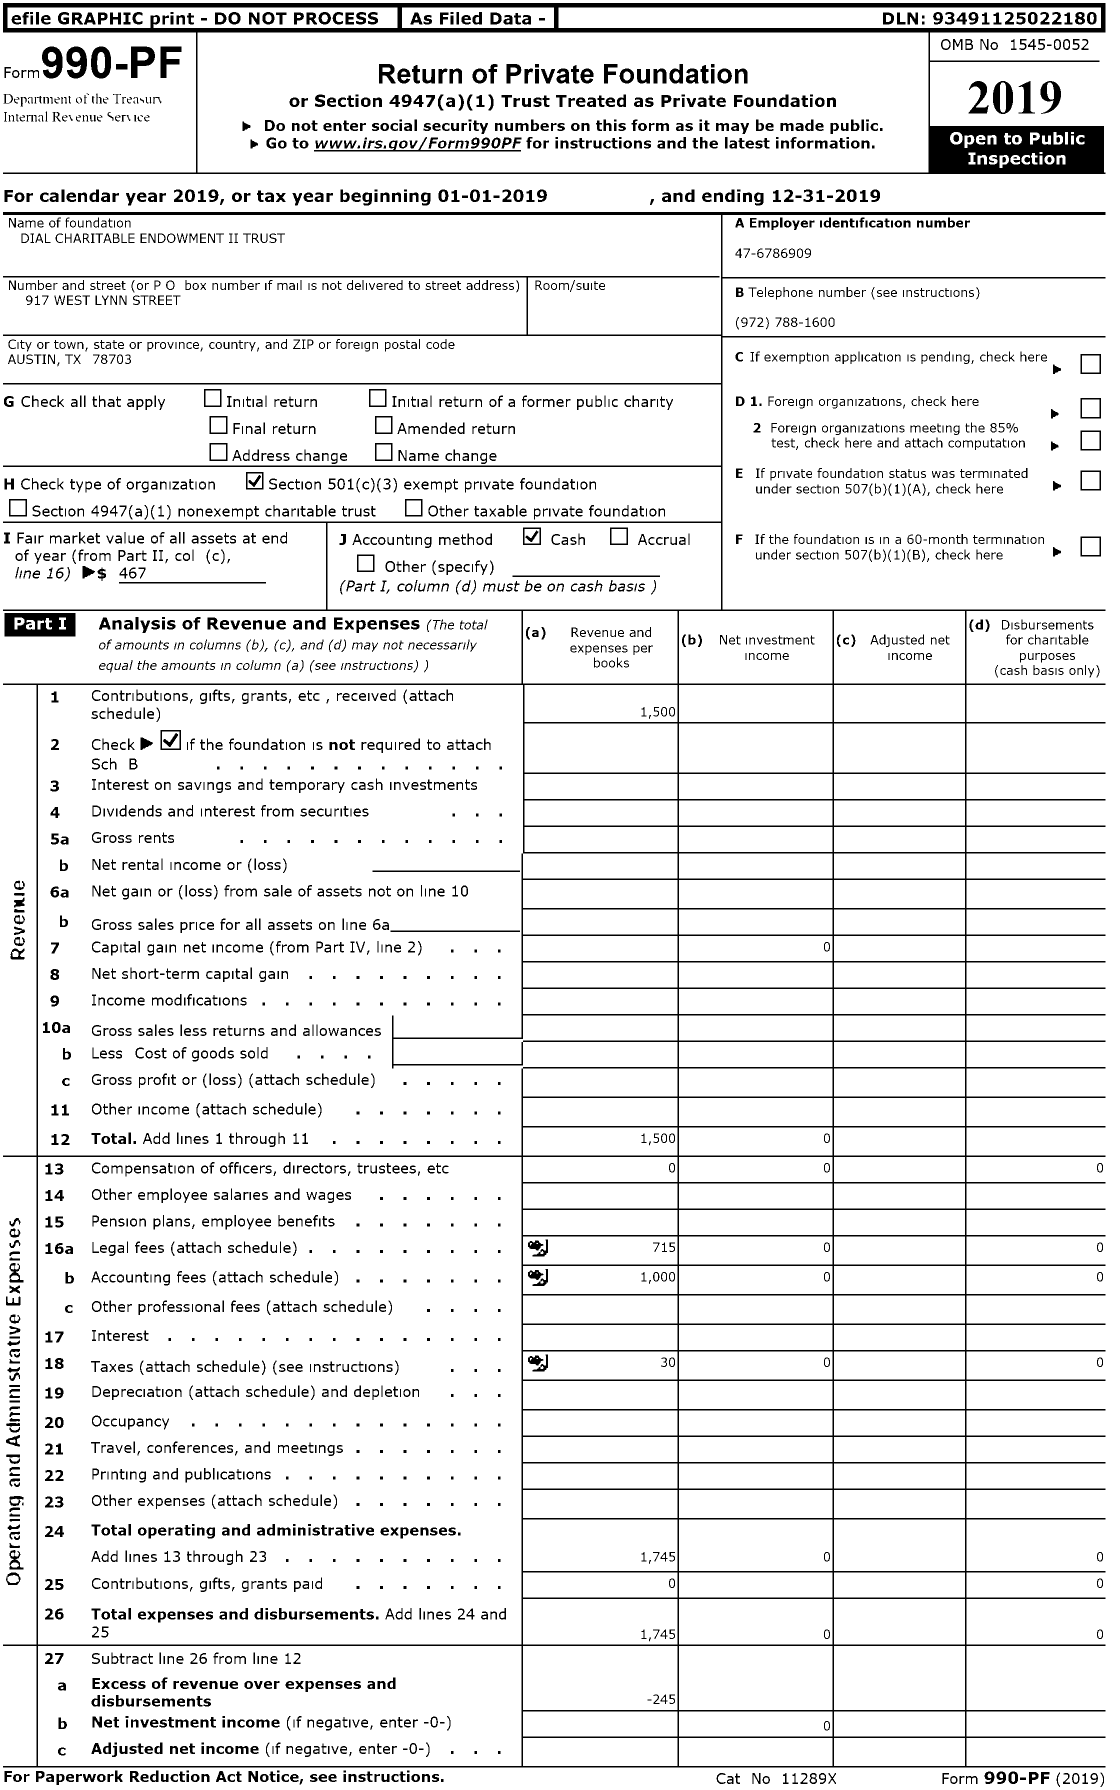 Image of first page of 2019 Form 990PR for Dial Charitable Endowment Ii Trust